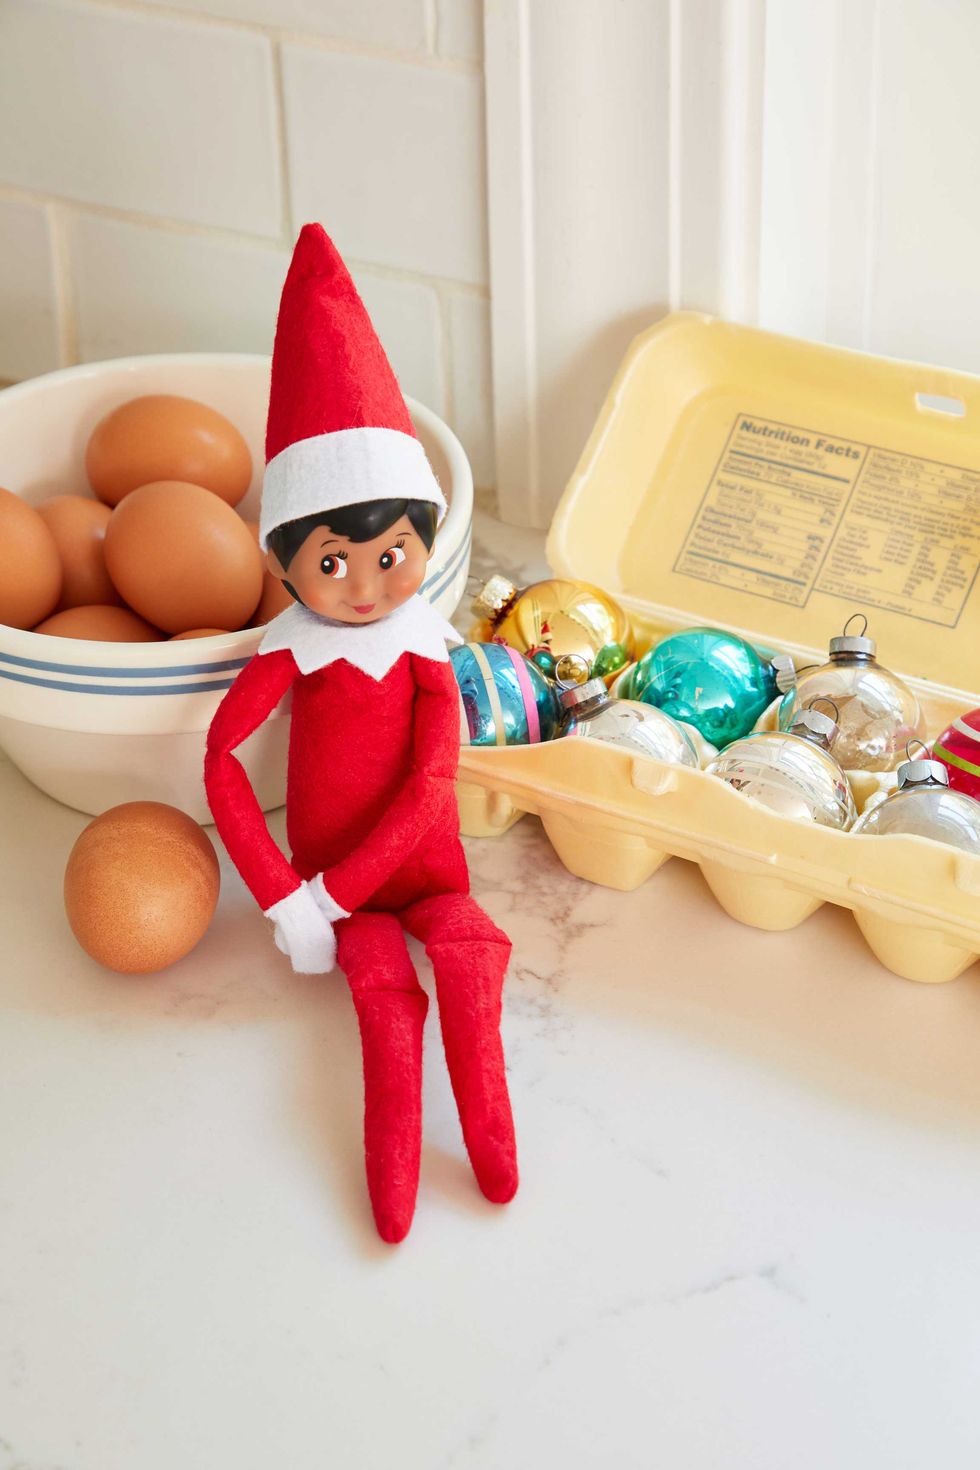 Elf on a shelf with eggs and ornaments